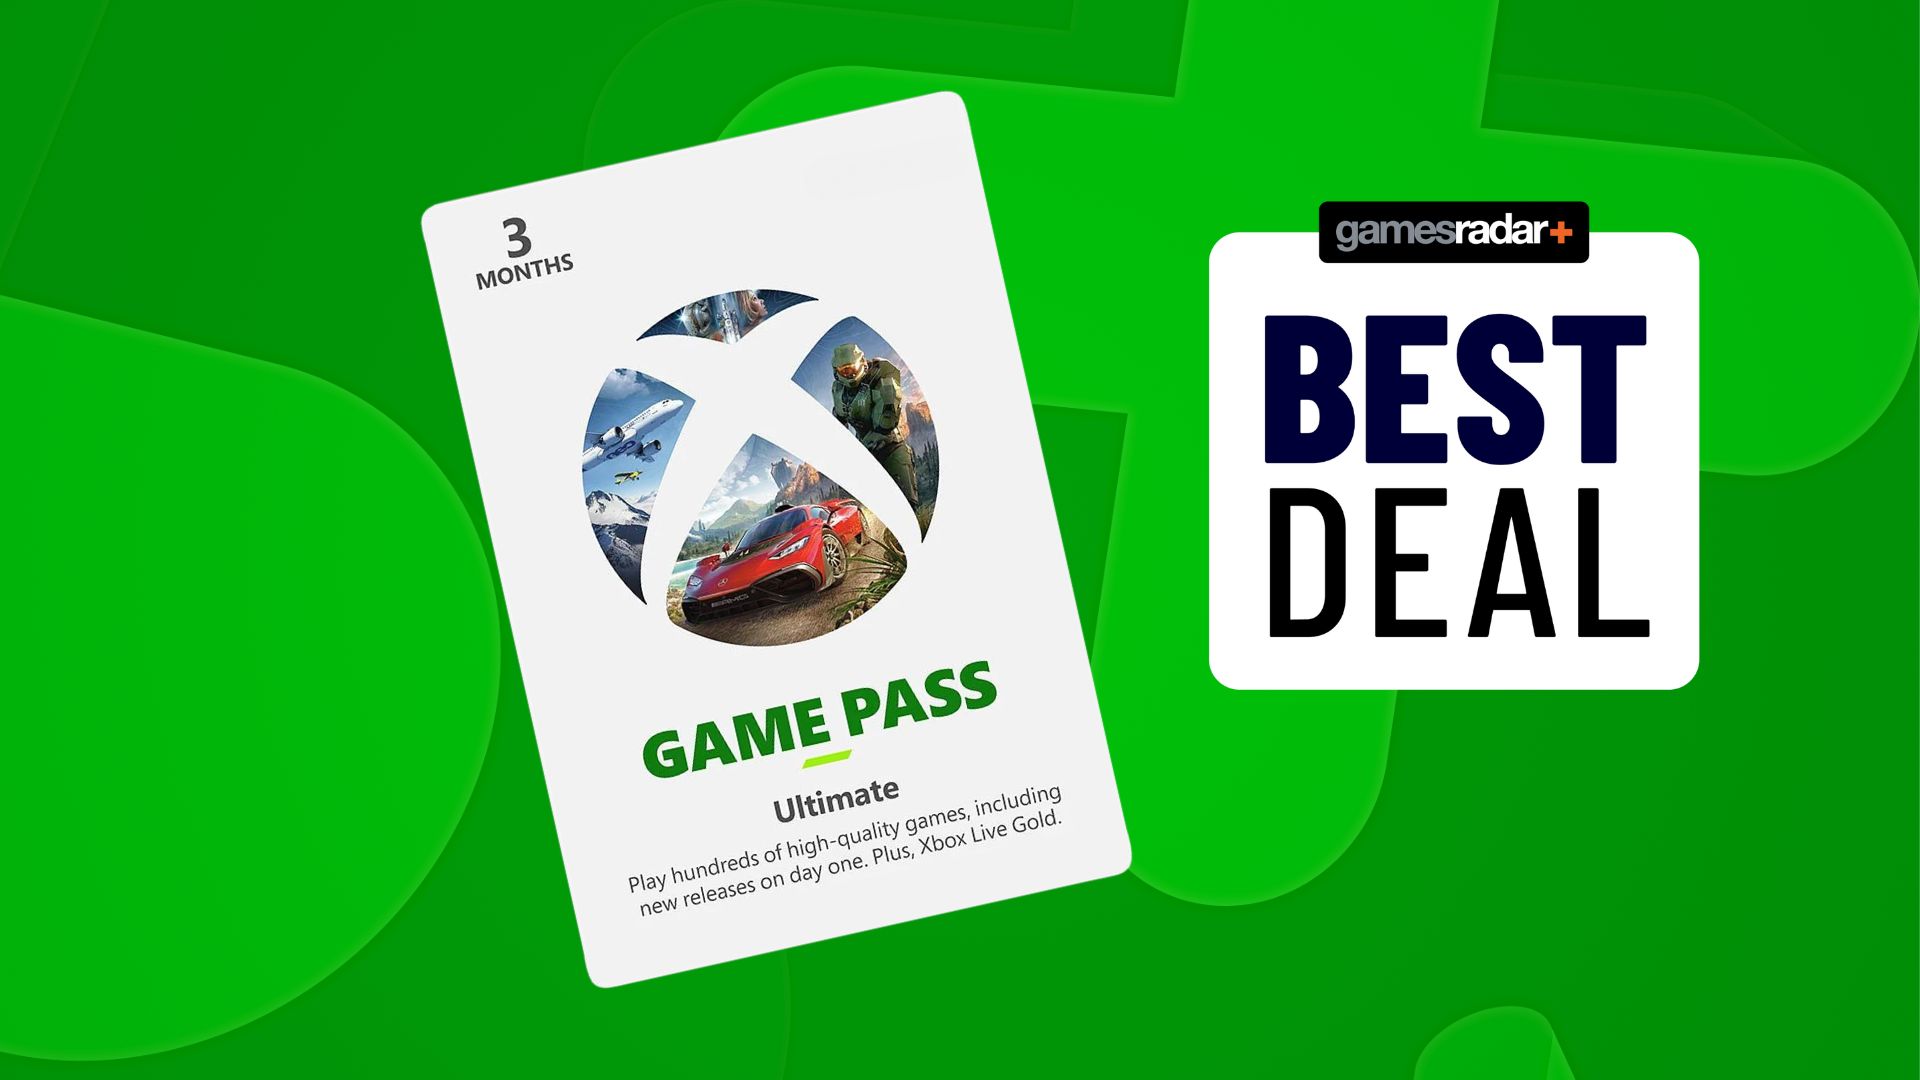 I’d recommend this Game Pass Ultimate deal to any gamer - even if they don’t own an Xbox